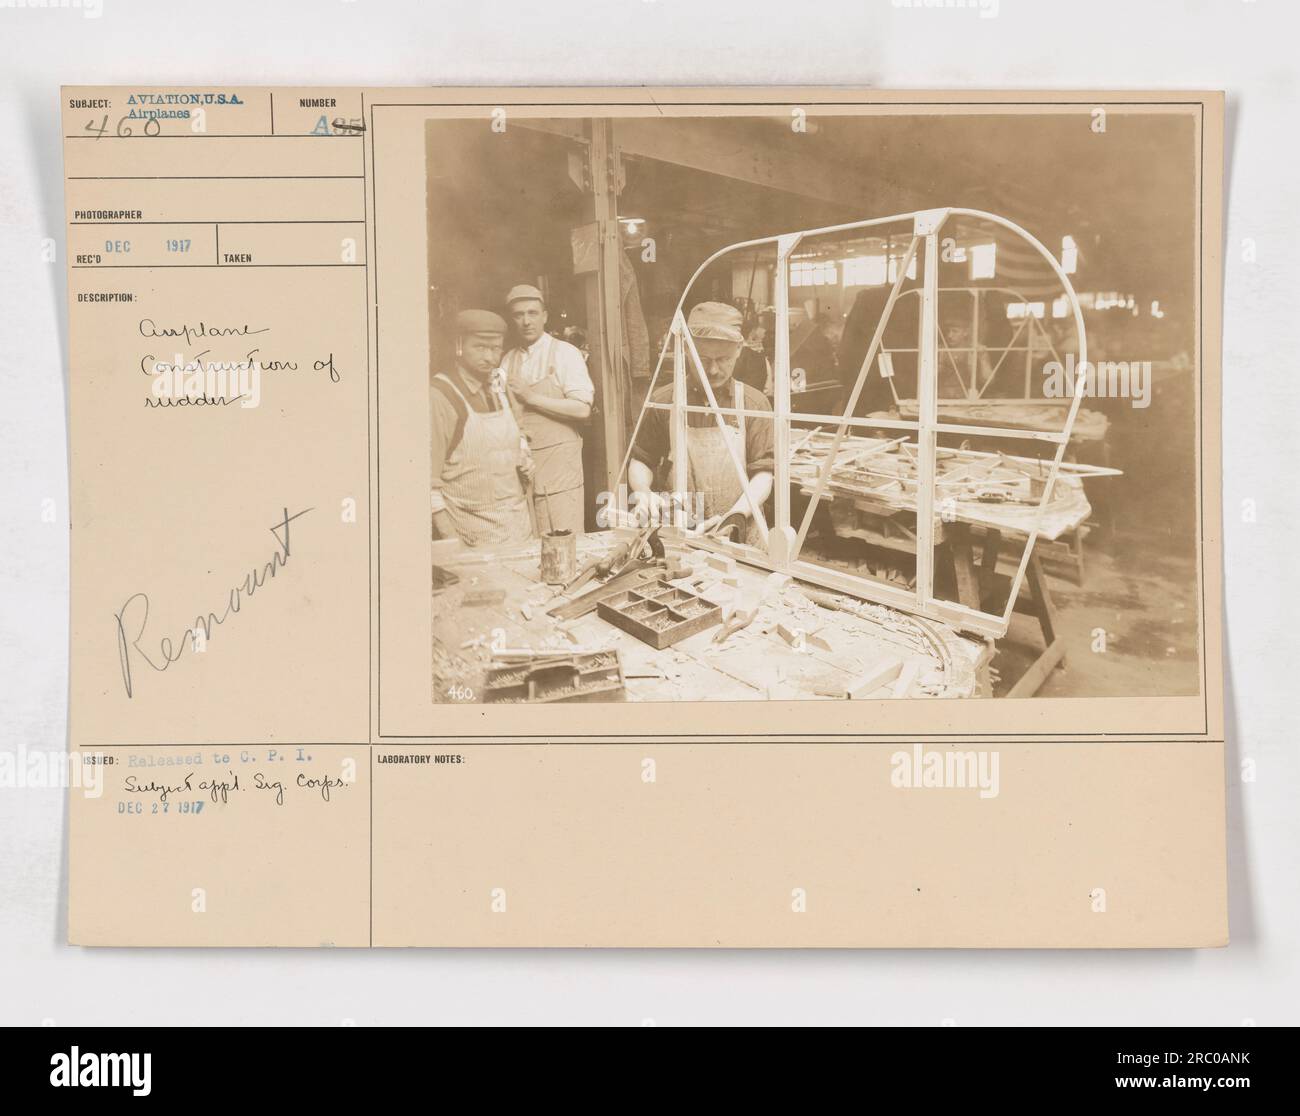 Image of an aviation training session during World War One. The photograph shows the construction of a rudder on an airplane. Taken in December 1917, the image showcases the technical aspects of aircraft manufacturing during the war. Labeled as image number 111-SC-460, it was released to the Committee on Public Information. Stock Photo